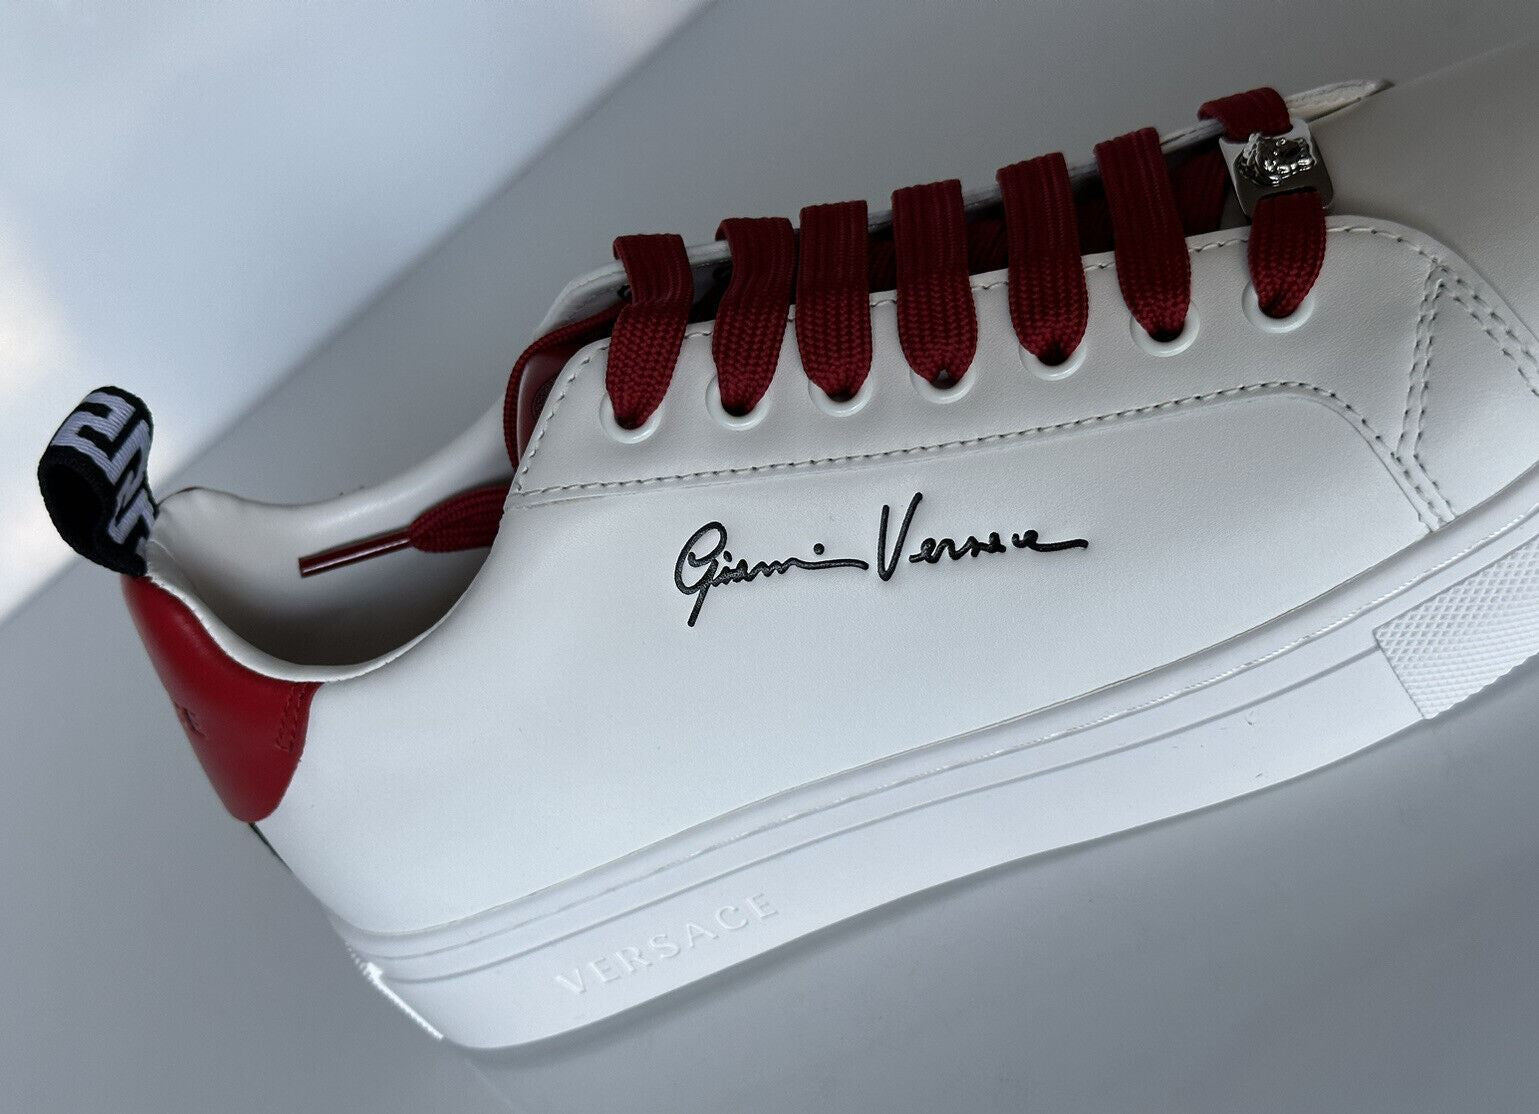 NIB $750 Versace Low Top White/Red Leather Sneakers 8 US (38 Euro) 1002773